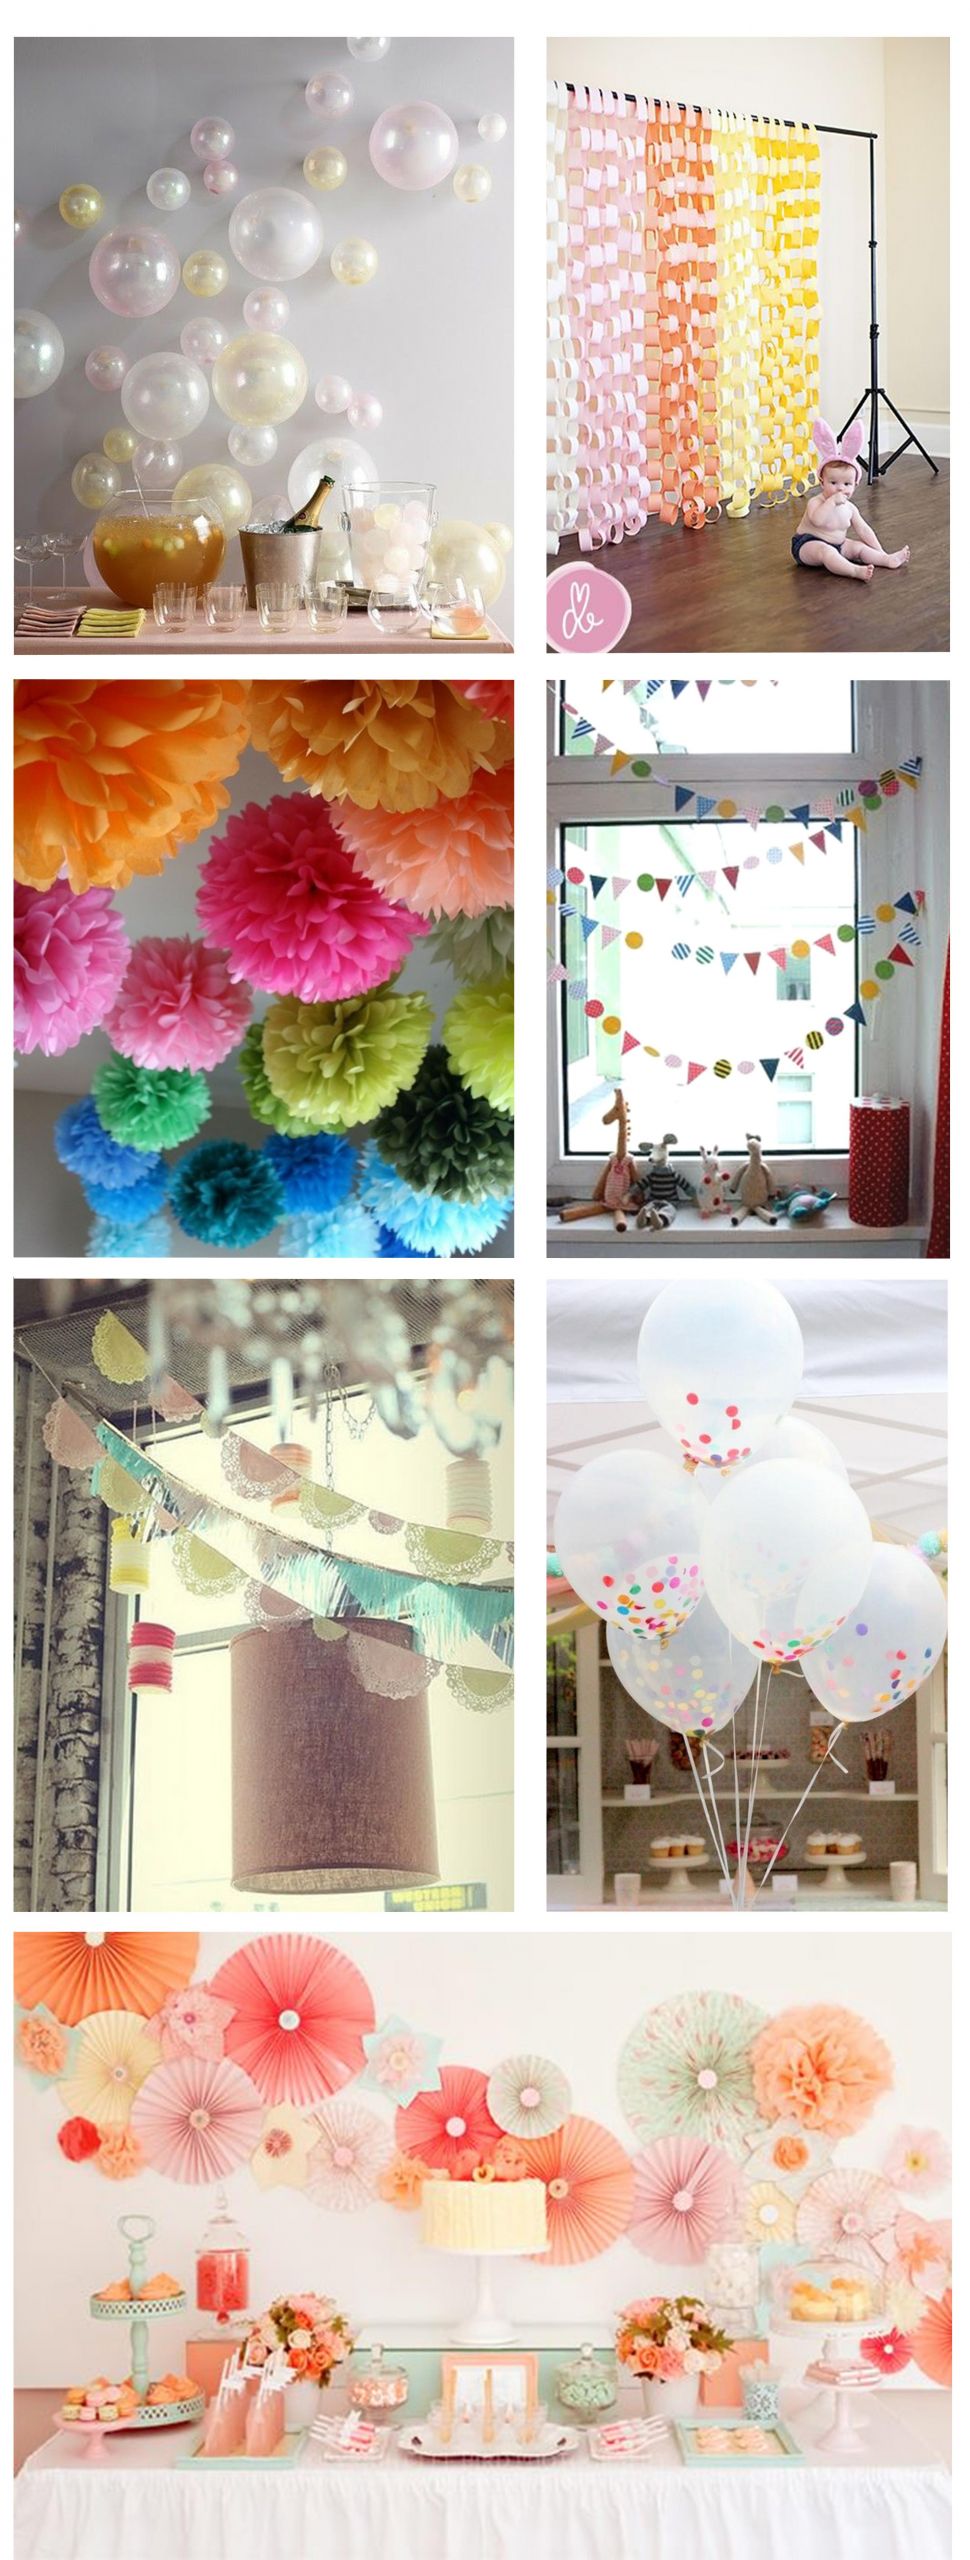 Birthday Party Decorations Diy
 Ideas for home made party decorations